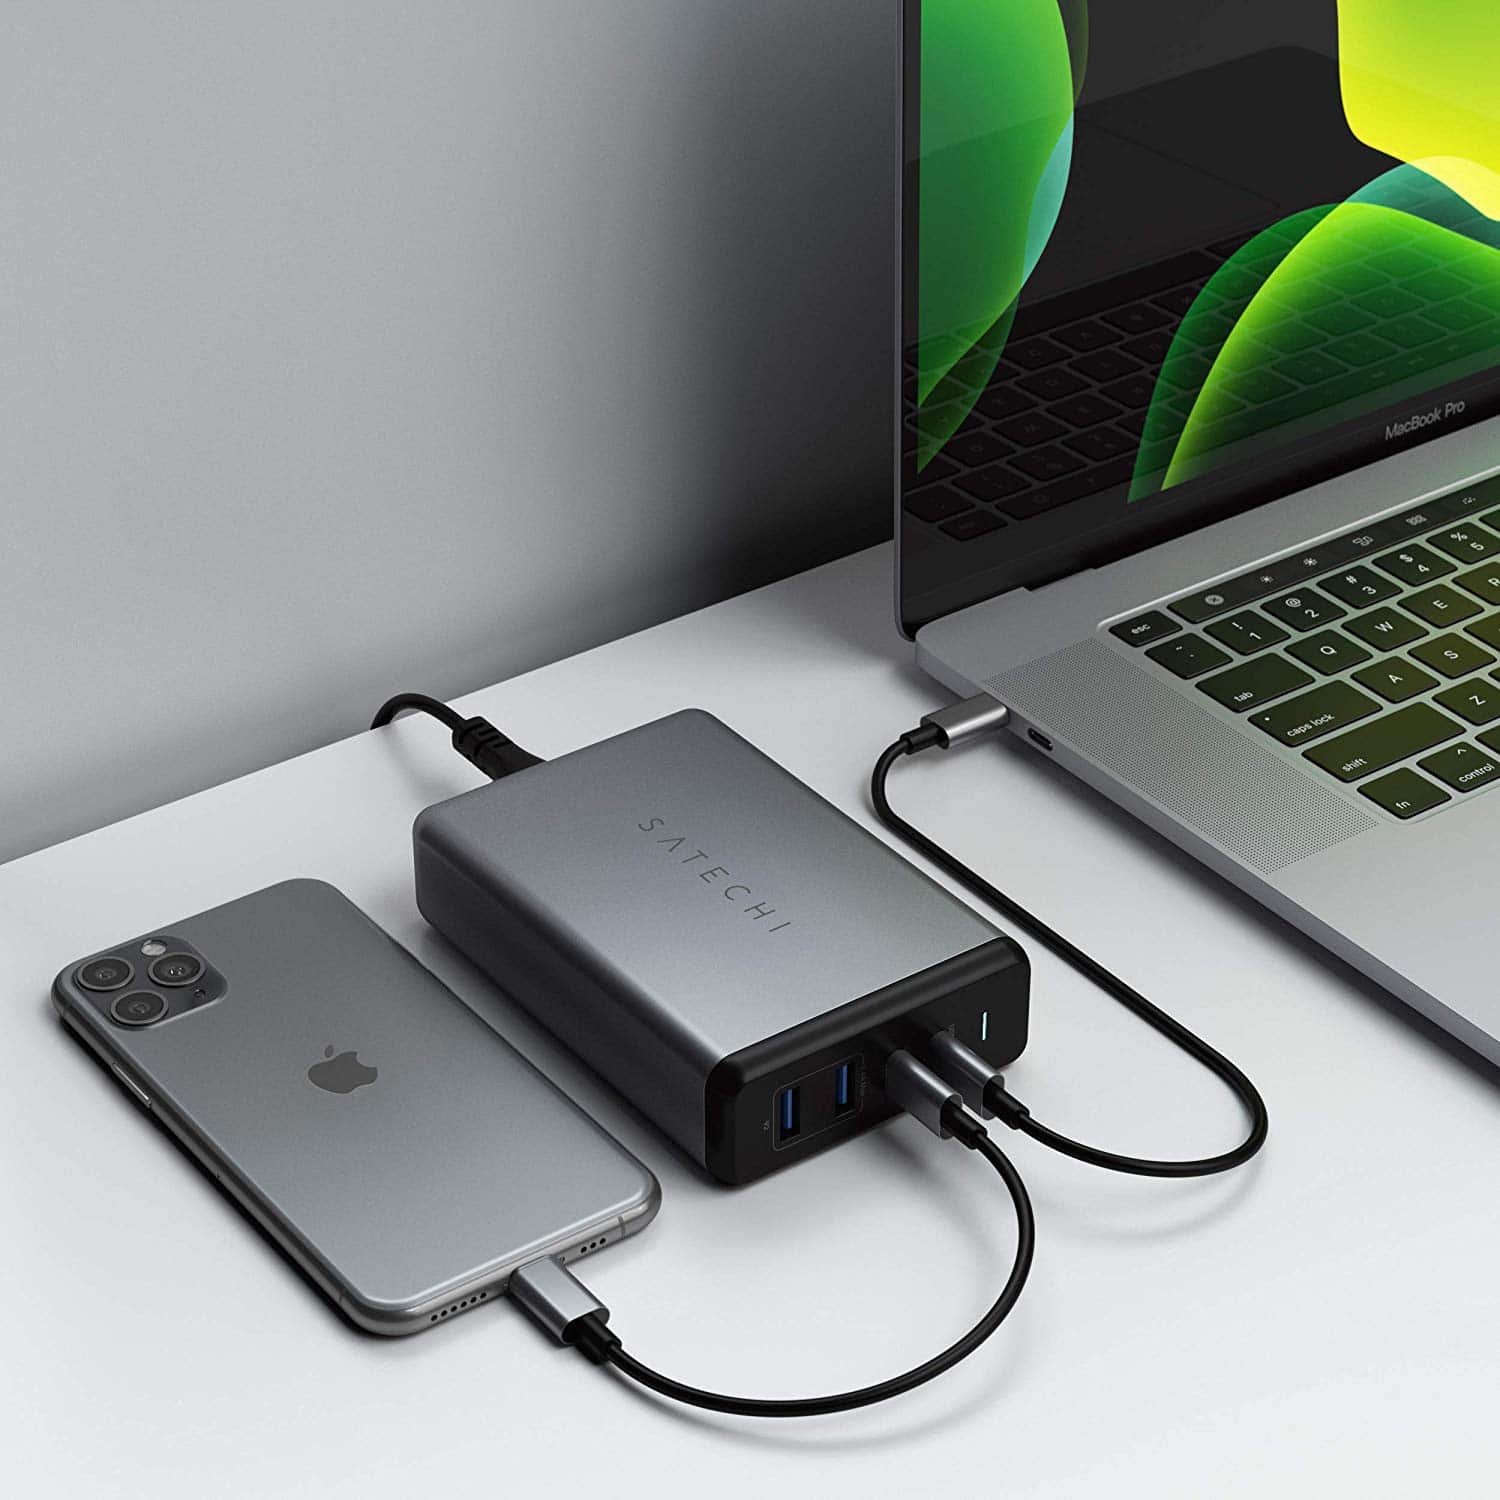 Satechi accessory provides fast charging for up to 4 devices; elago, Ultimate Ears and Sonnet also have news